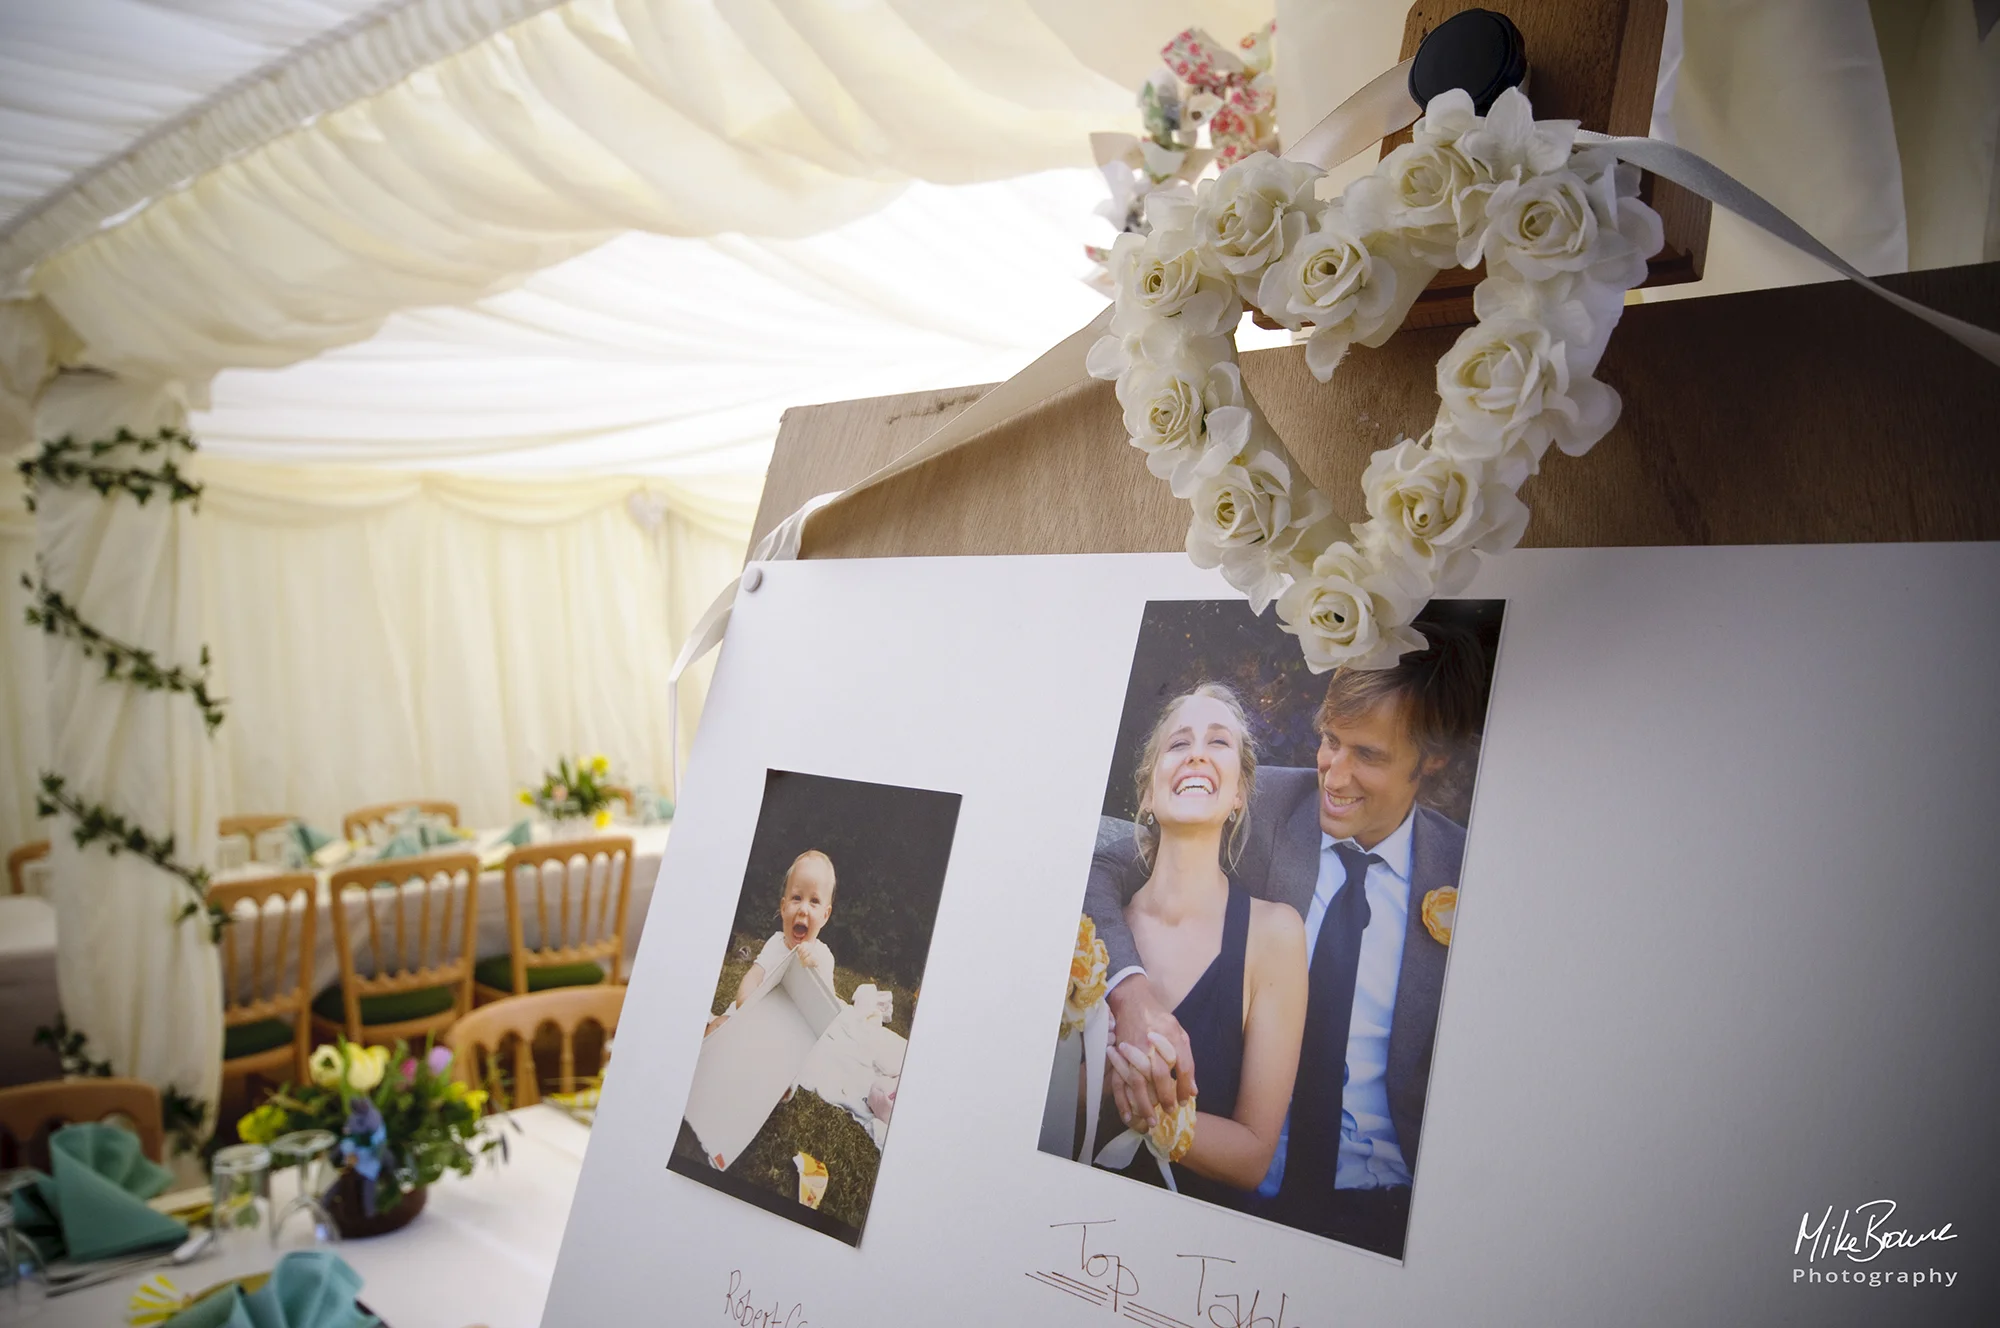 Photo board in a marquee with heart shaped bouquet of white roses and pictures of a young man and woman displayed on it